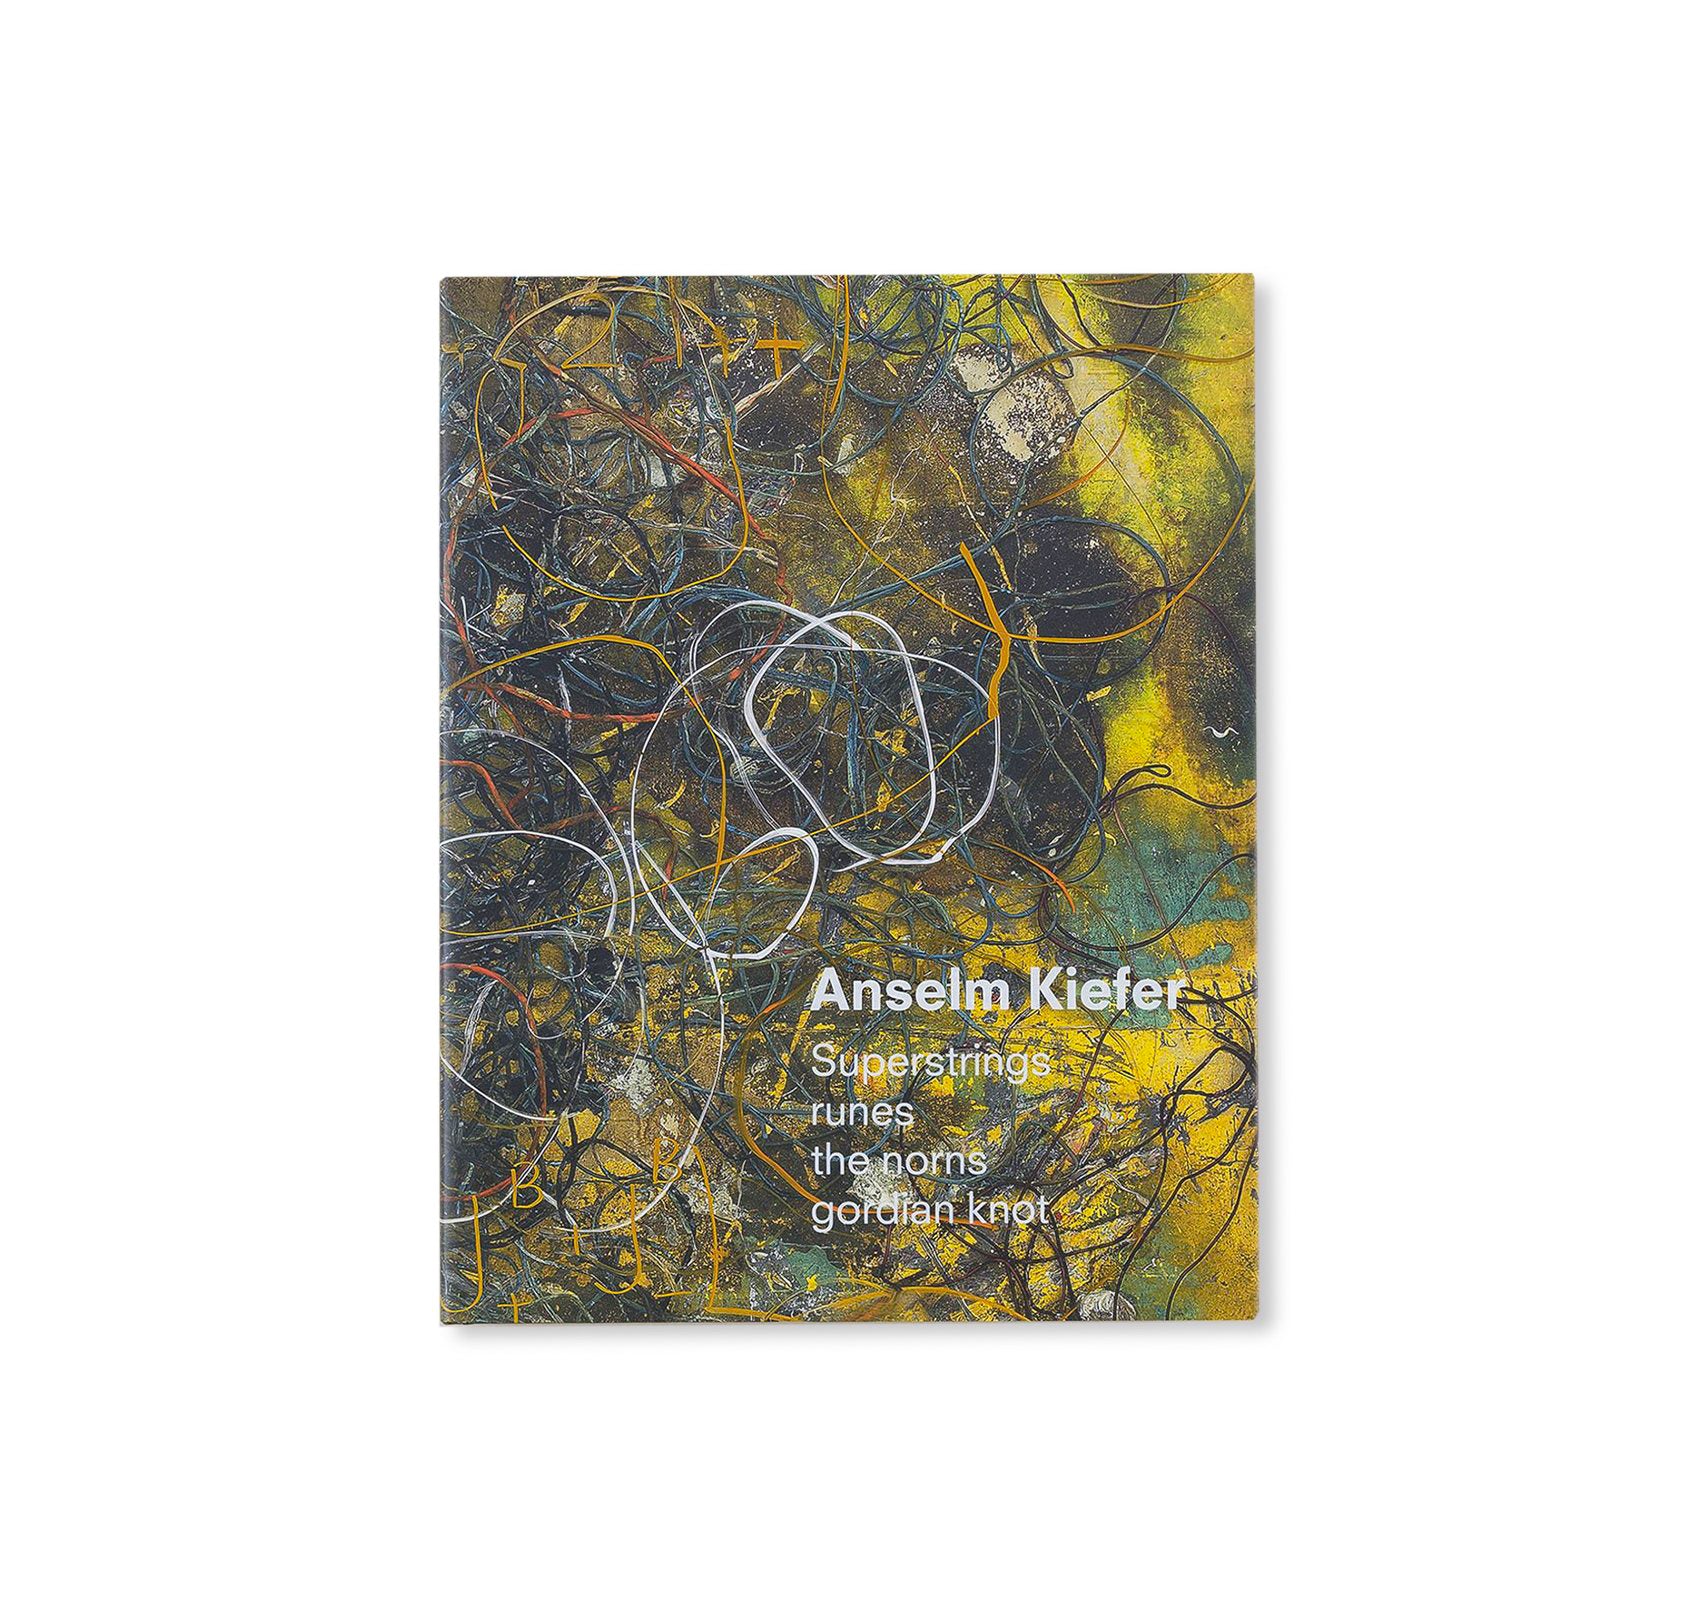 SUPERSTRINGS, RUNES, THE NORNS, GORDIAN KNOT by Anselm Kiefer